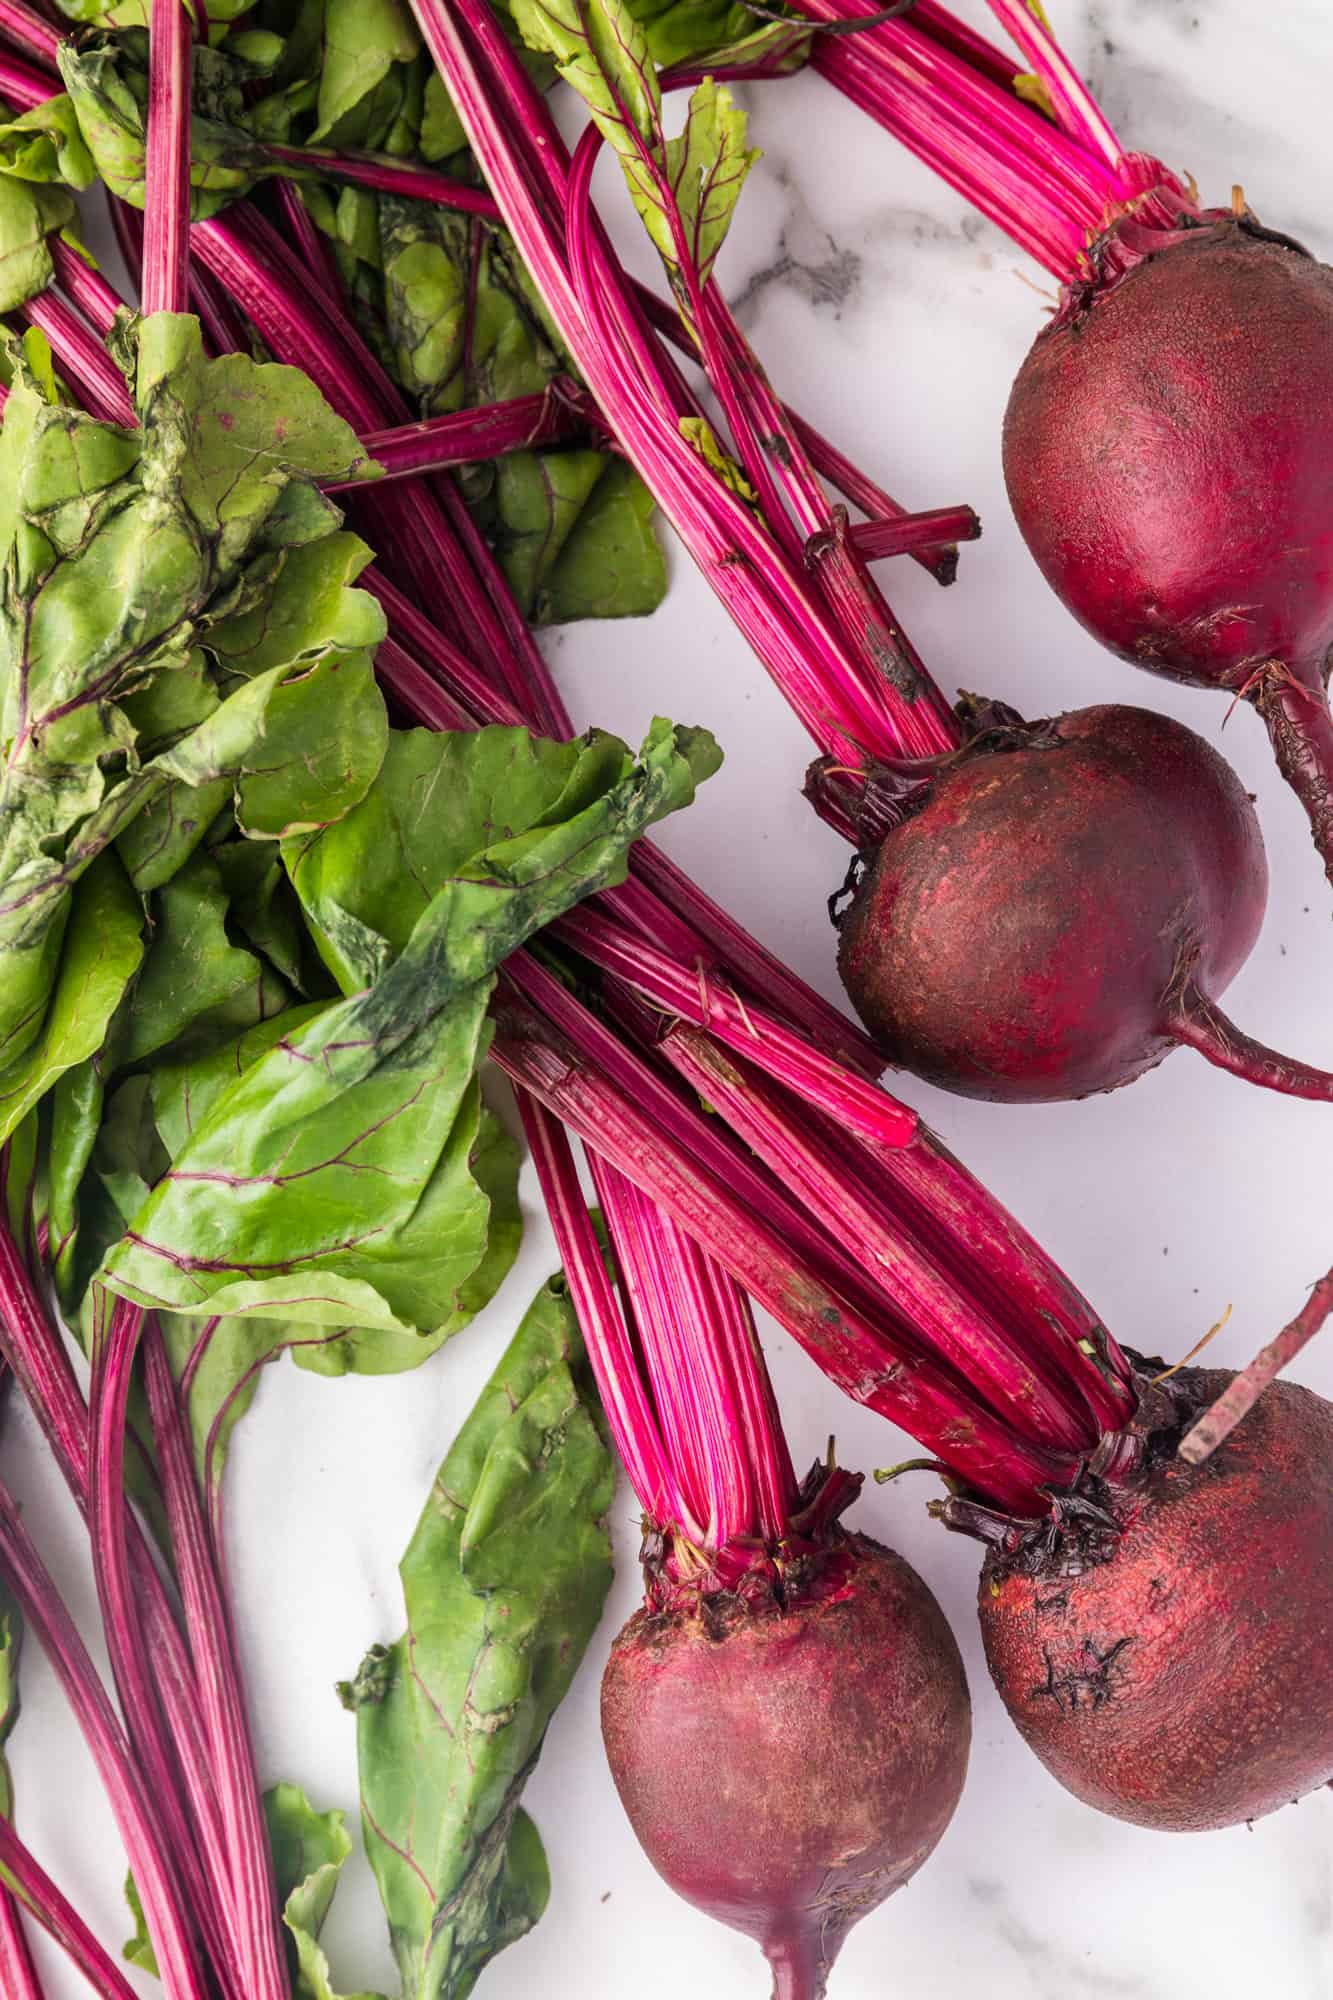 Fresh beets with greens still attached.